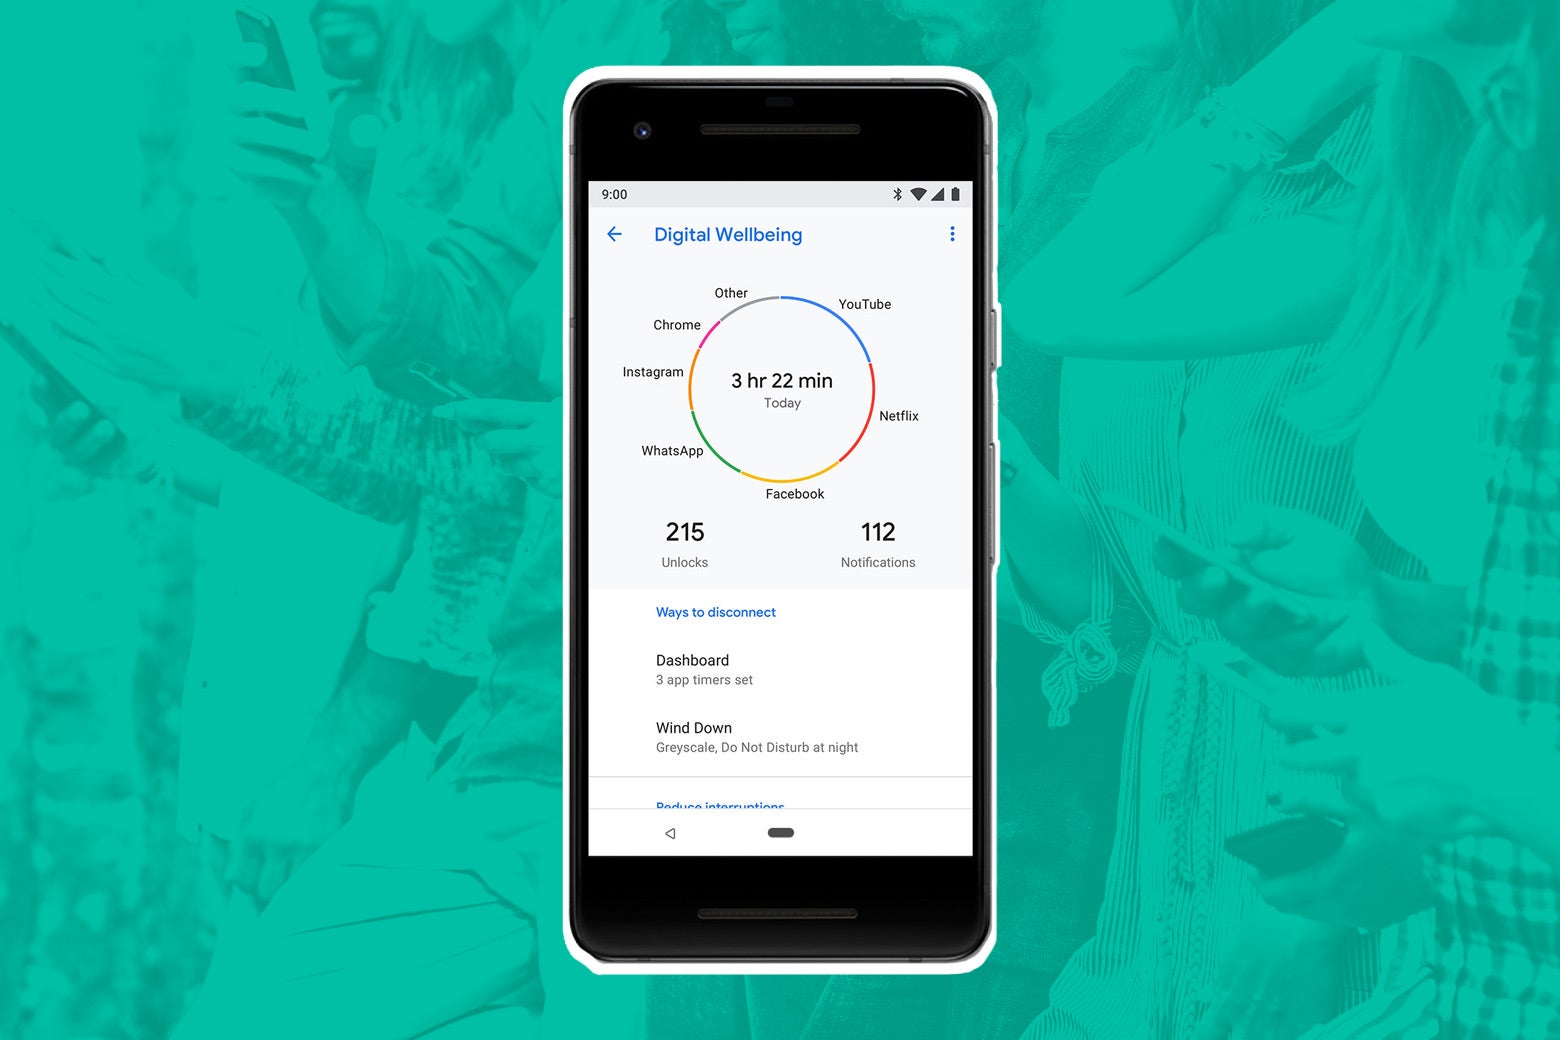 Google's Digital Wellbeing dashboard displays information about your usage habits and offers features to help manage your time on your smartphone.